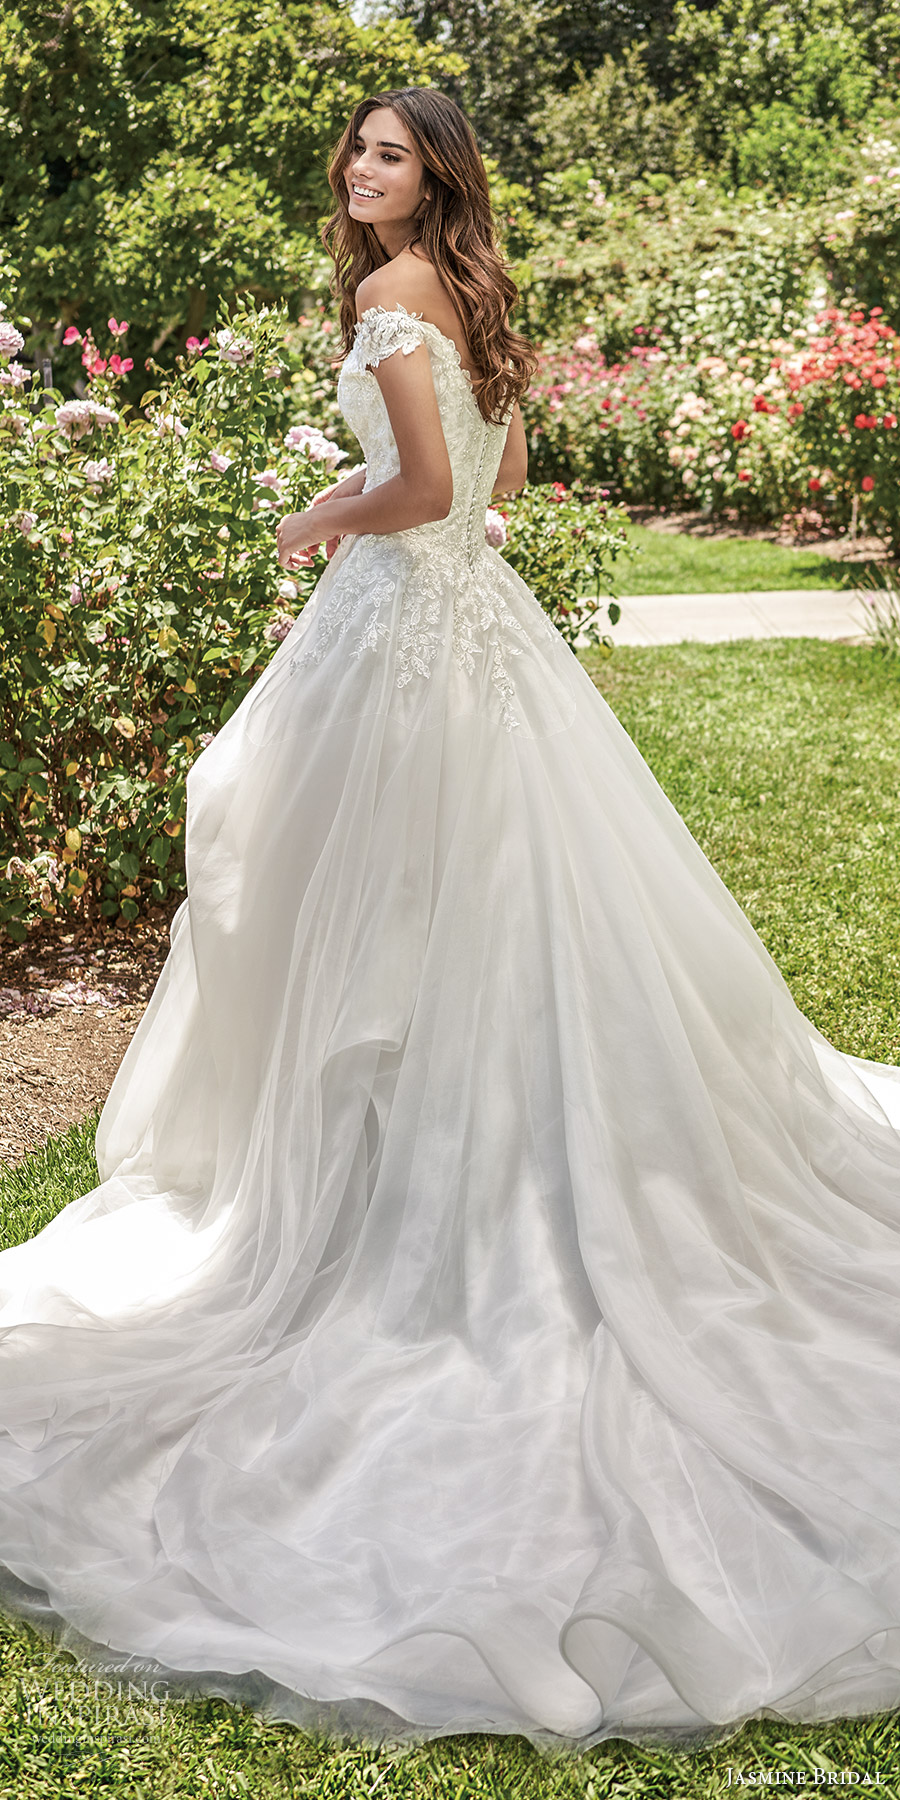 jasmine spring 2020 collection off shoulder straps sweetheart neckline heavily embellished bodice a line ball gown wedding dress chapel train (9) bv